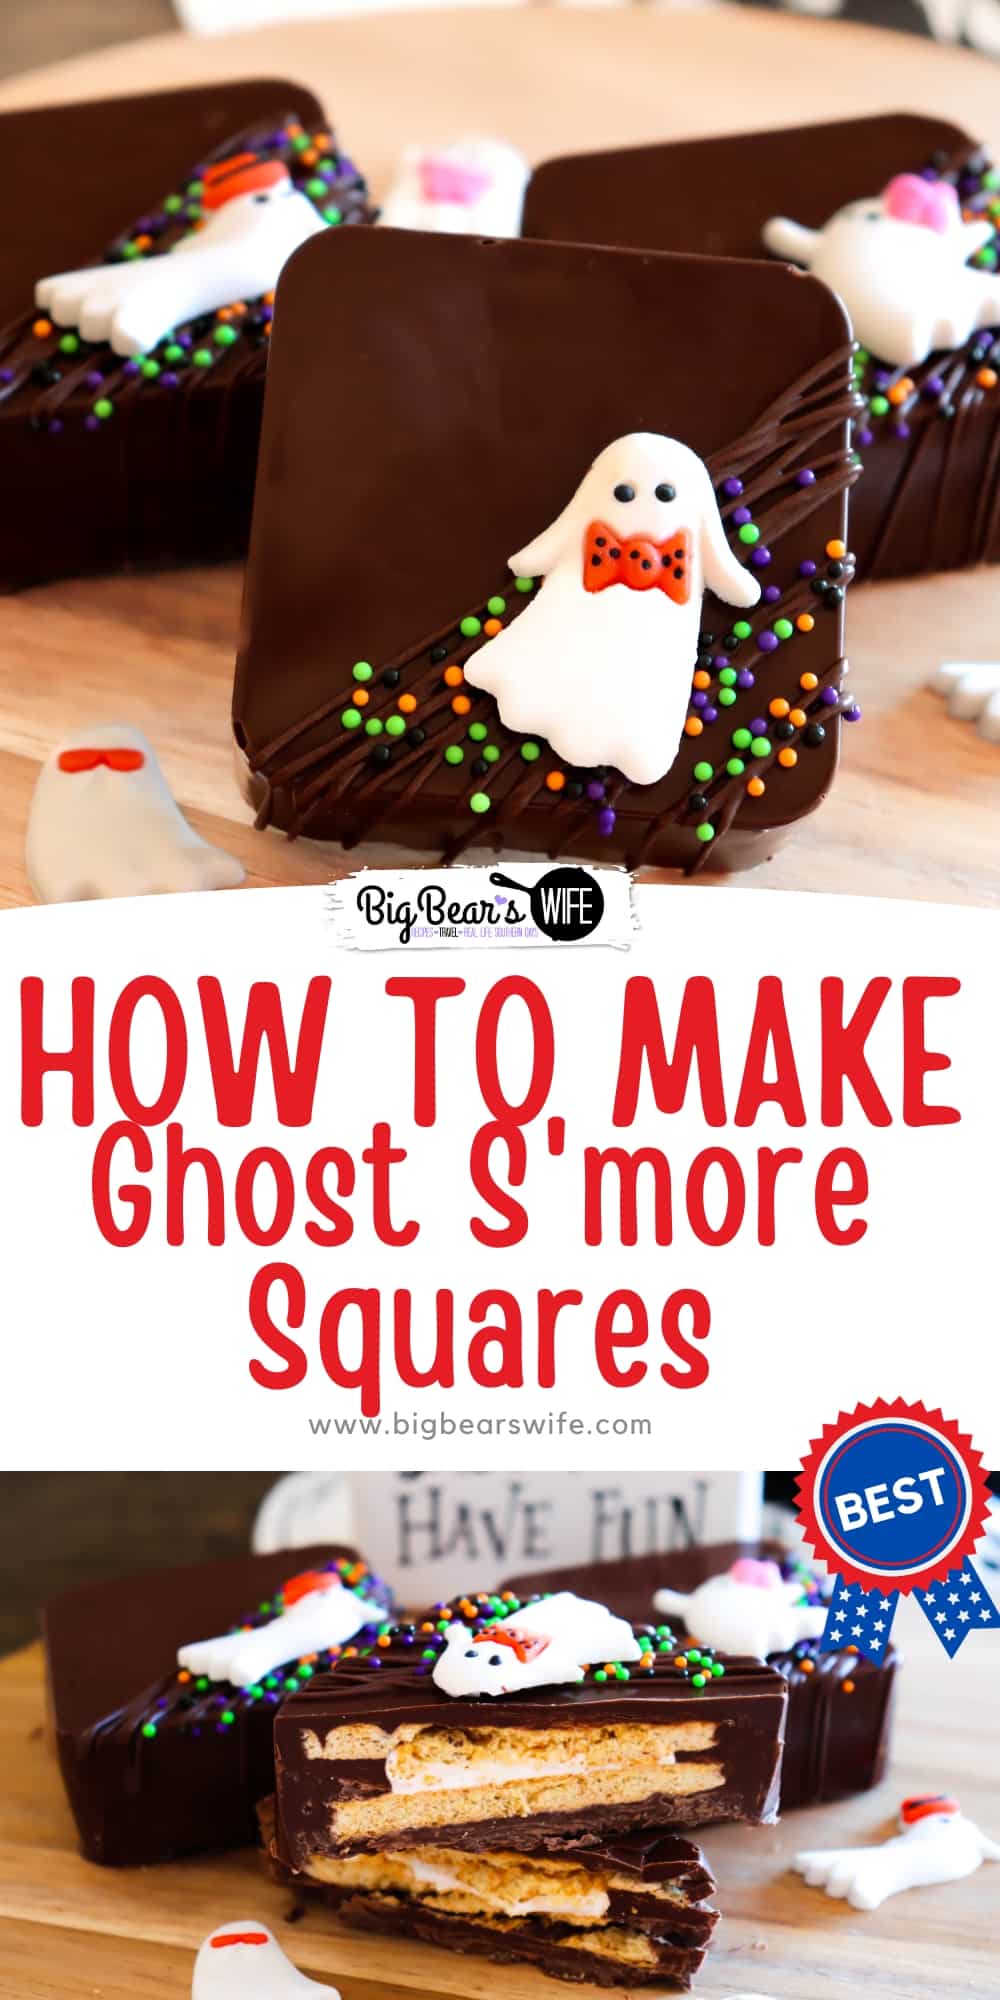 These Ghost S'more Squares are super cute and pretty easy to make! You've got your graham cracker, marshmallow and chocolate all packed together with a cute ghost on top.  via @bigbearswife